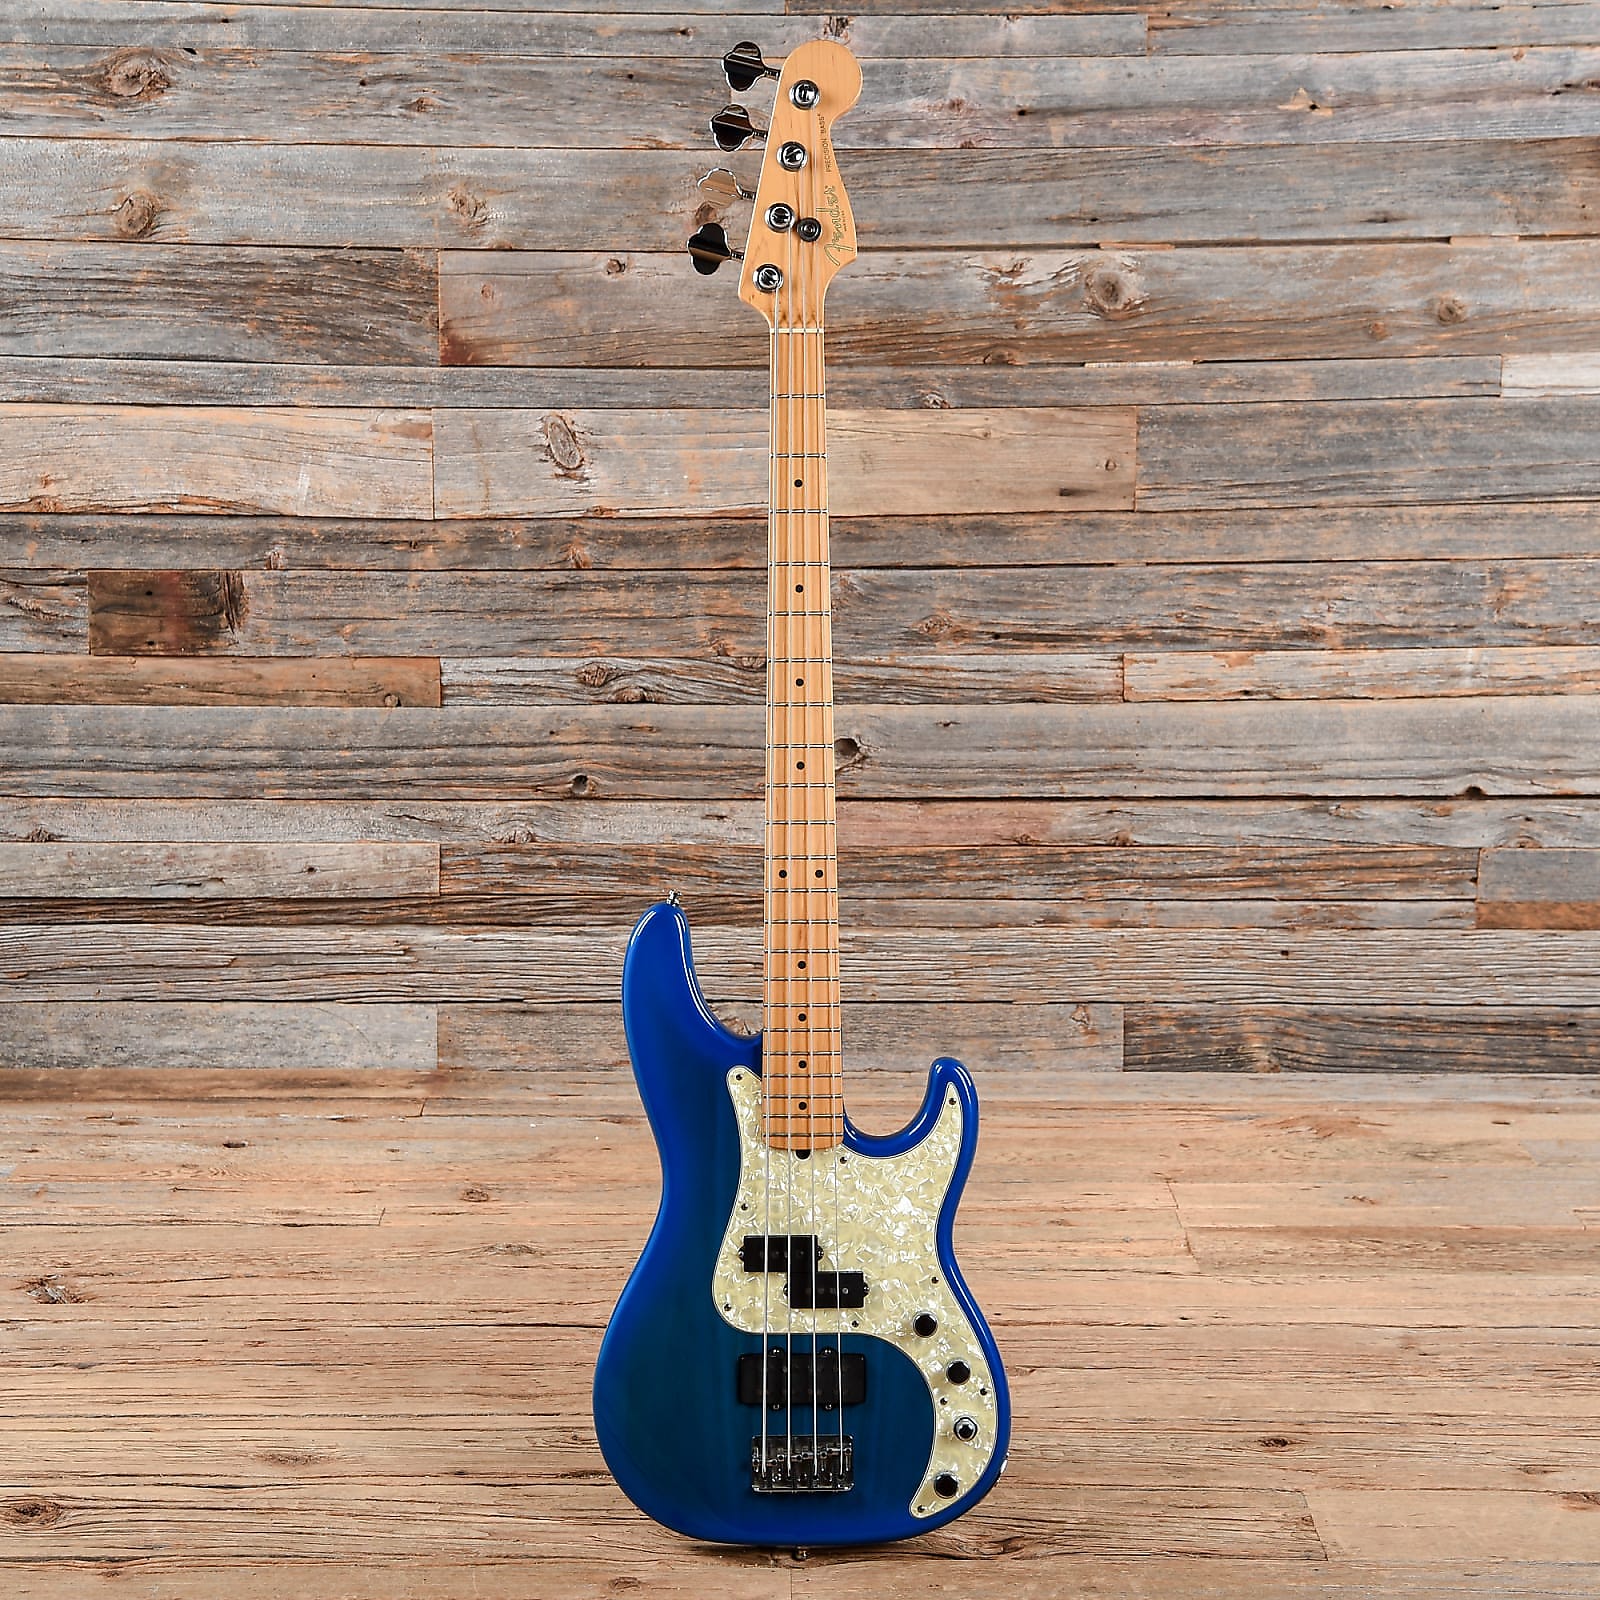 Fender Precision Bass Deluxe 1995 - 1998 | Reverb